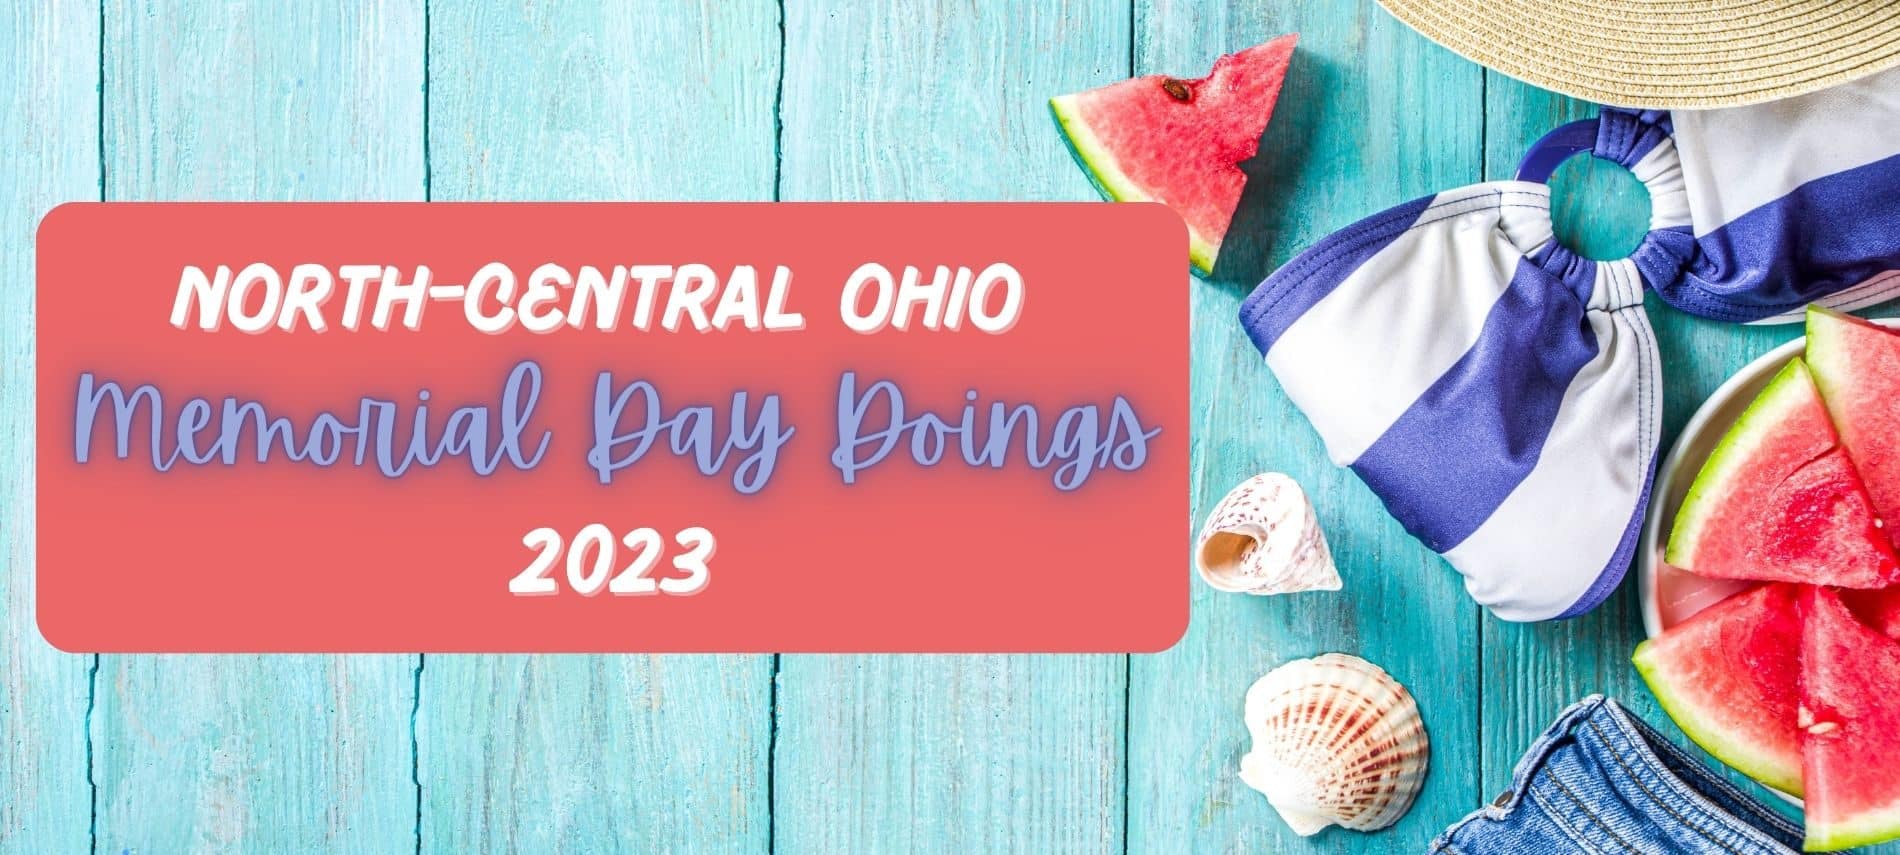 Summer clapboard background with swimming suit, jean shorts, watermelon and sea shells, with text "North-Central Ohio Memorial Day Doings 2023."